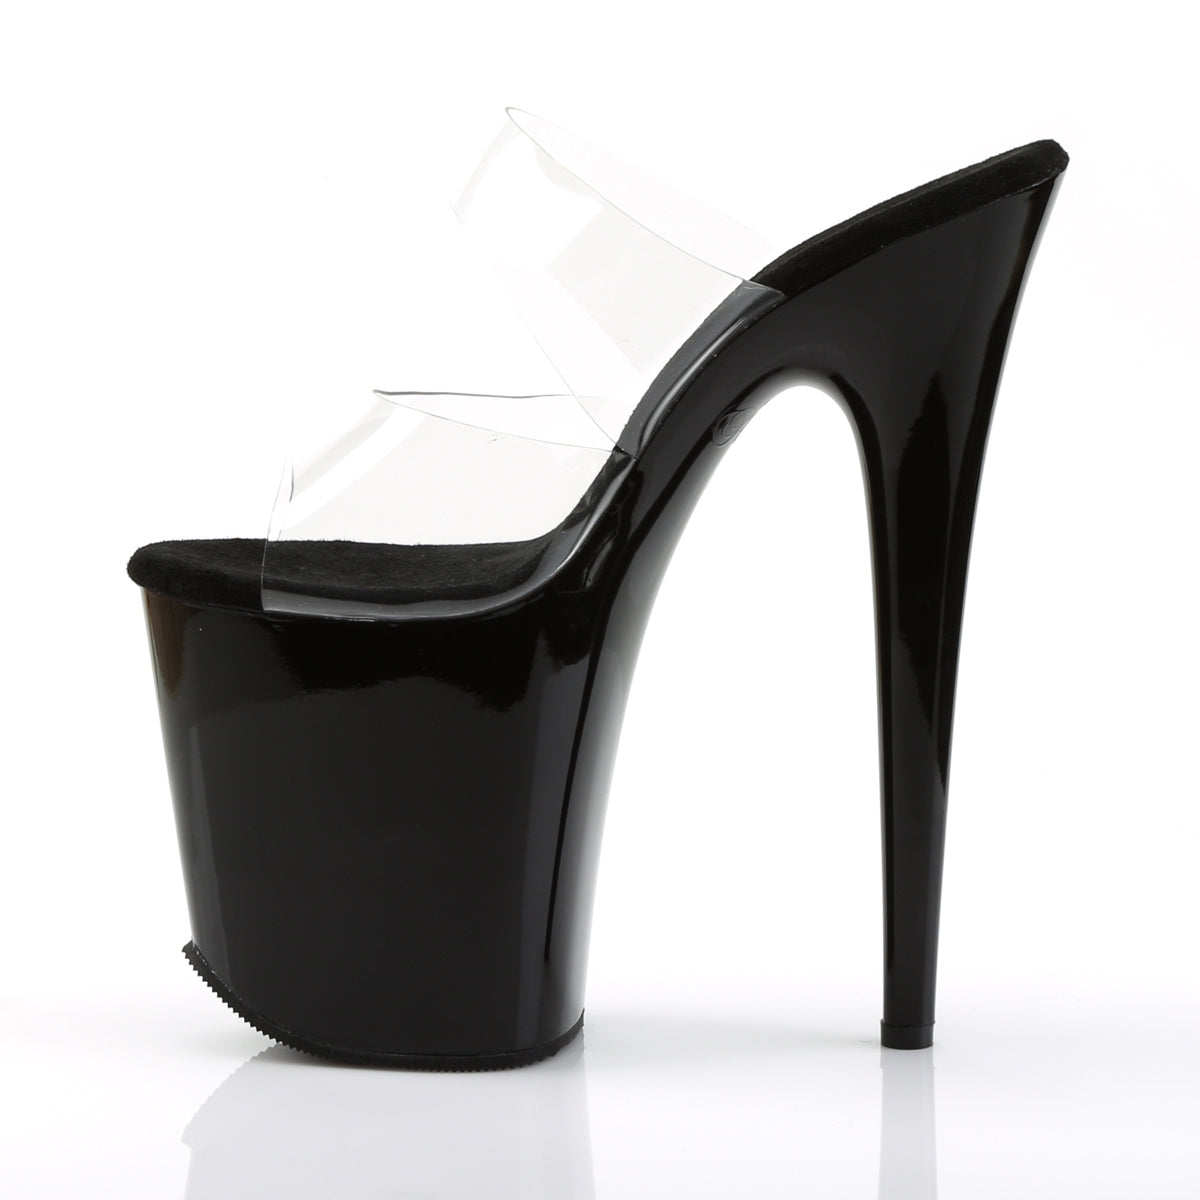 FLAMINGO-802 8" Heel Clear and Black Pole Dancing Platforms-Pleaser- Sexy Shoes Pole Dance Heels